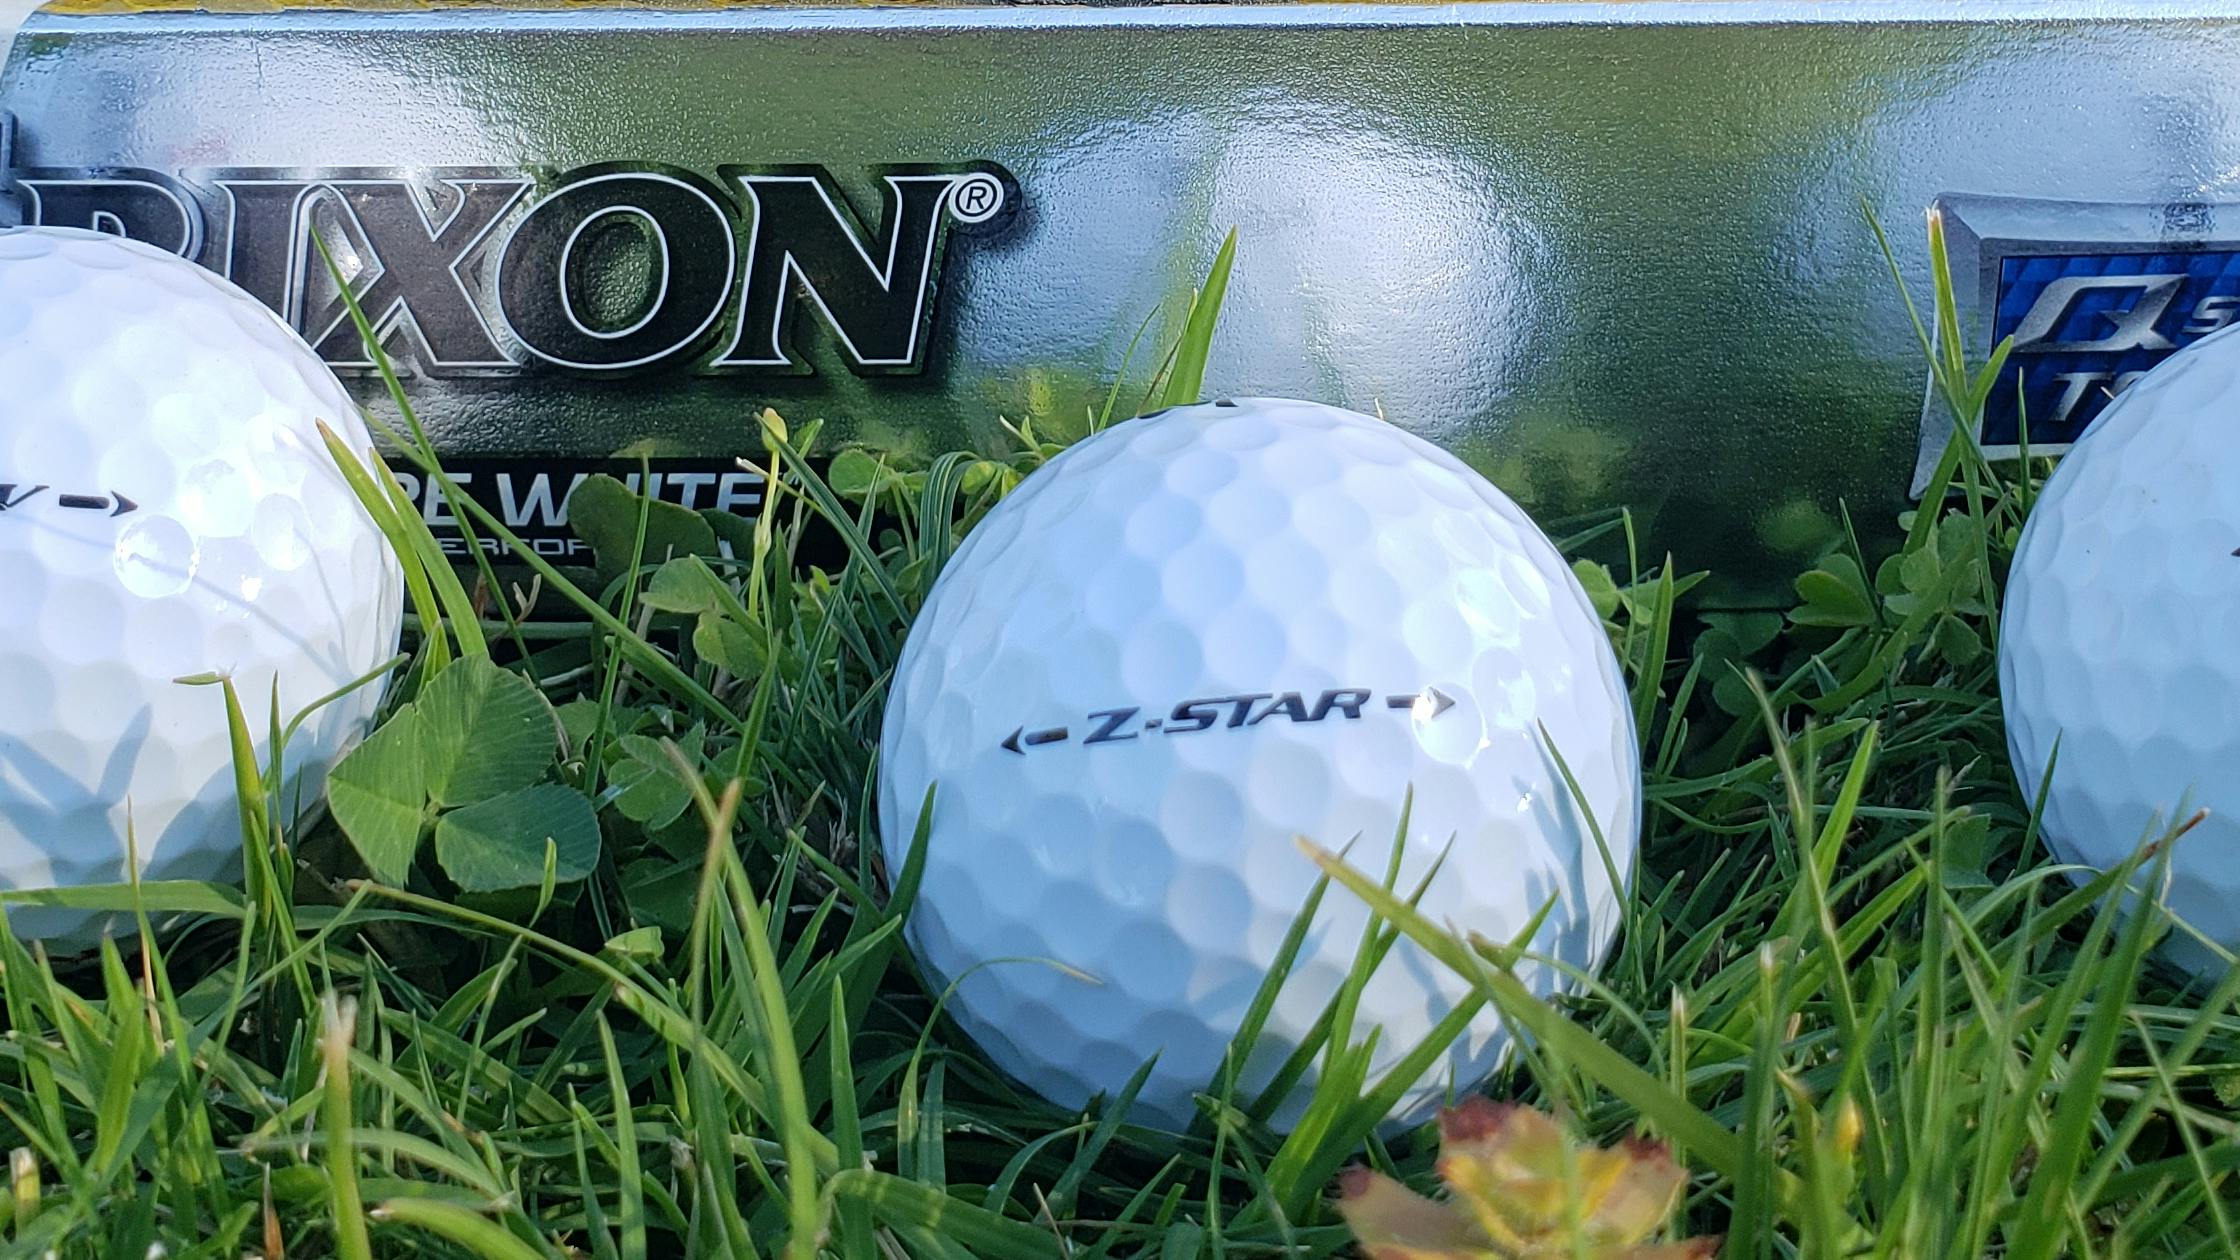 Three white golf balls with a silver box labeled "Srixon" behind them